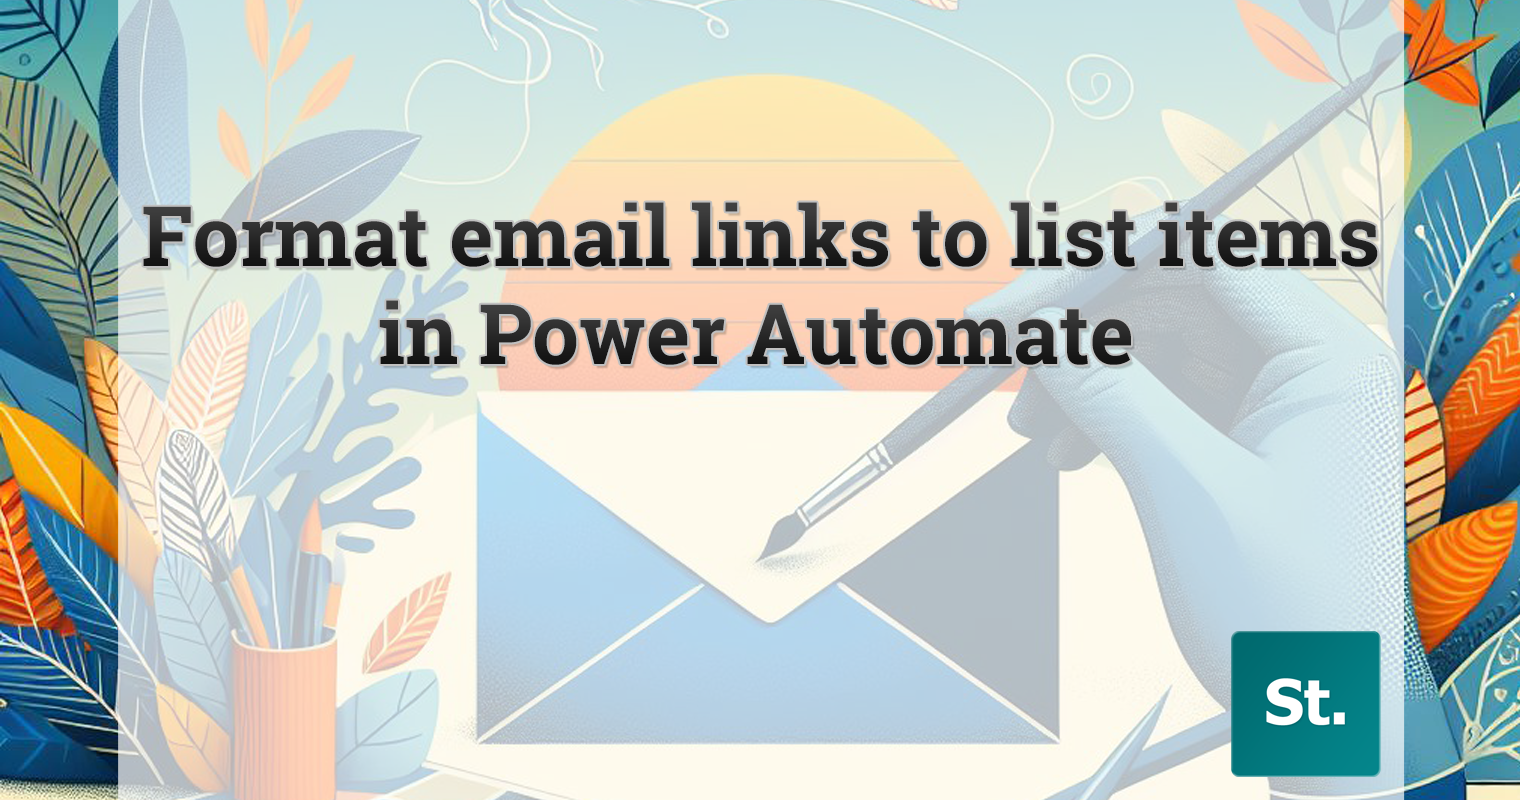 How to format email links to SharePoint list items in Power Automate